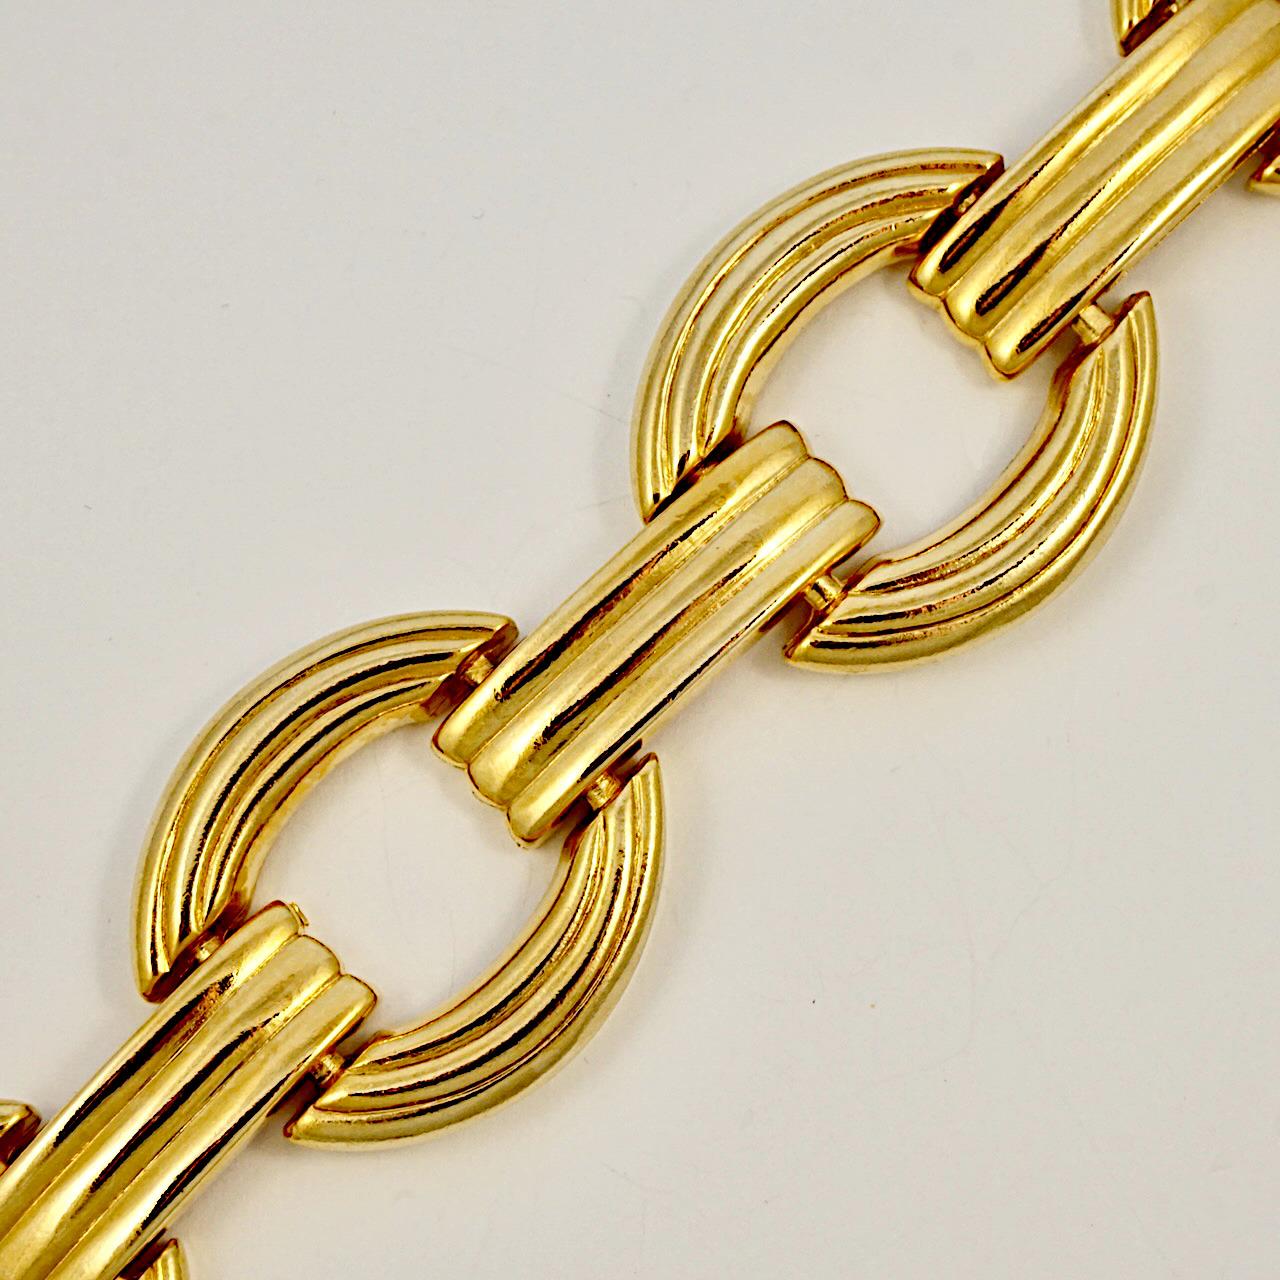 Fabulous gold plated link bracelet featuring a bold ridged design. Measuring length 19.2 cm / 7.5 inches by width 3.5 cm / 1.37 inches. The bracelet is in very good condition, with some wear to the gold plating.

This is a stylish gold plated